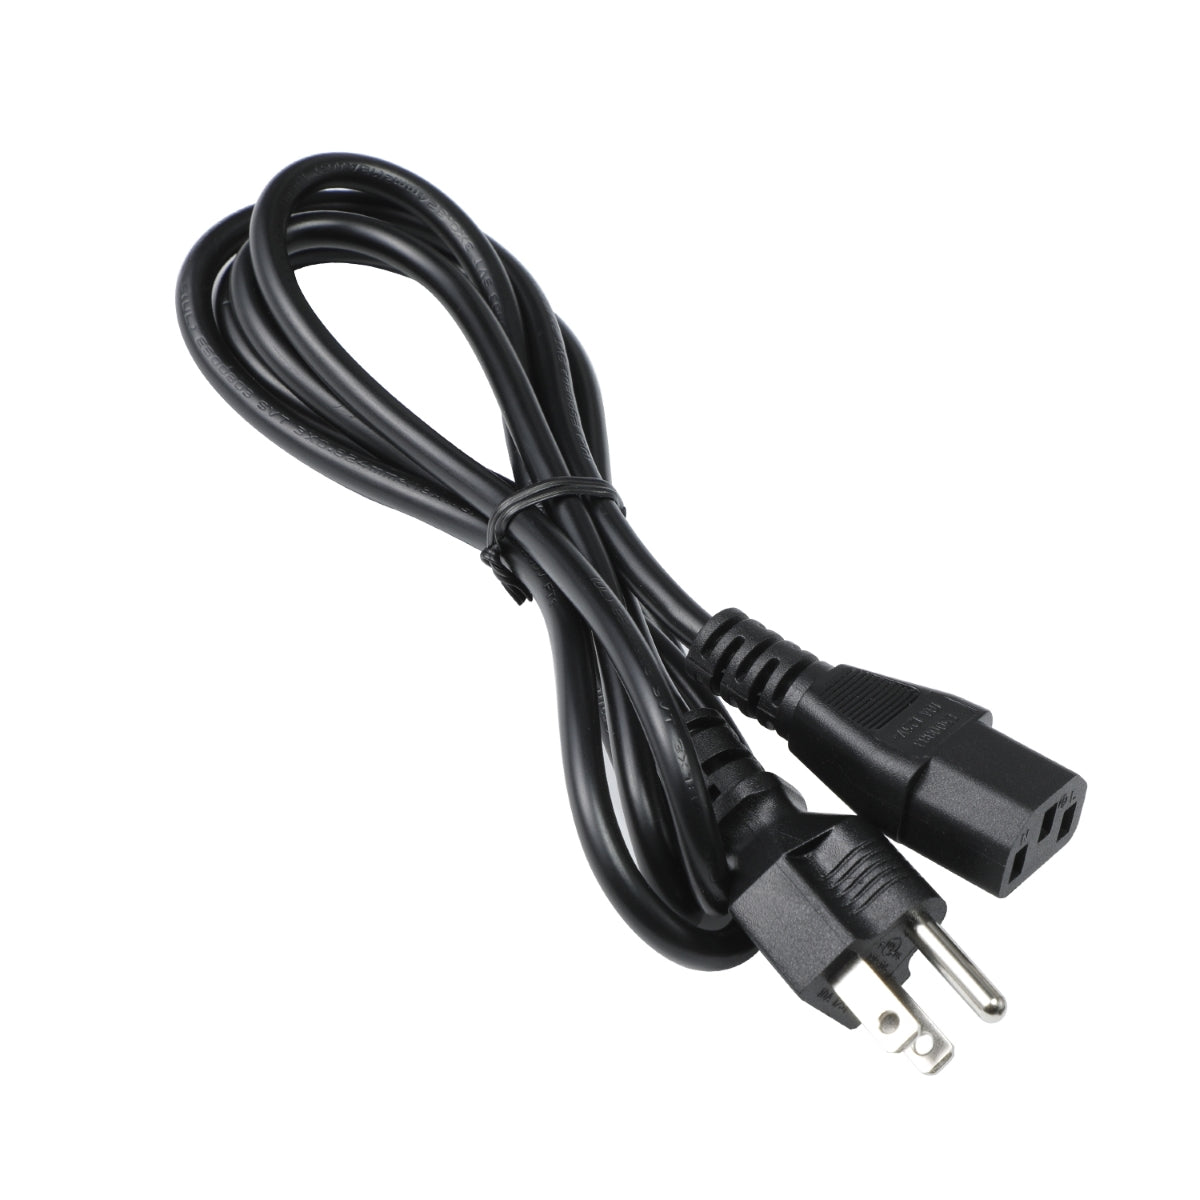 Power Cord for Lexmark MB2236adw Multifunction Printer.